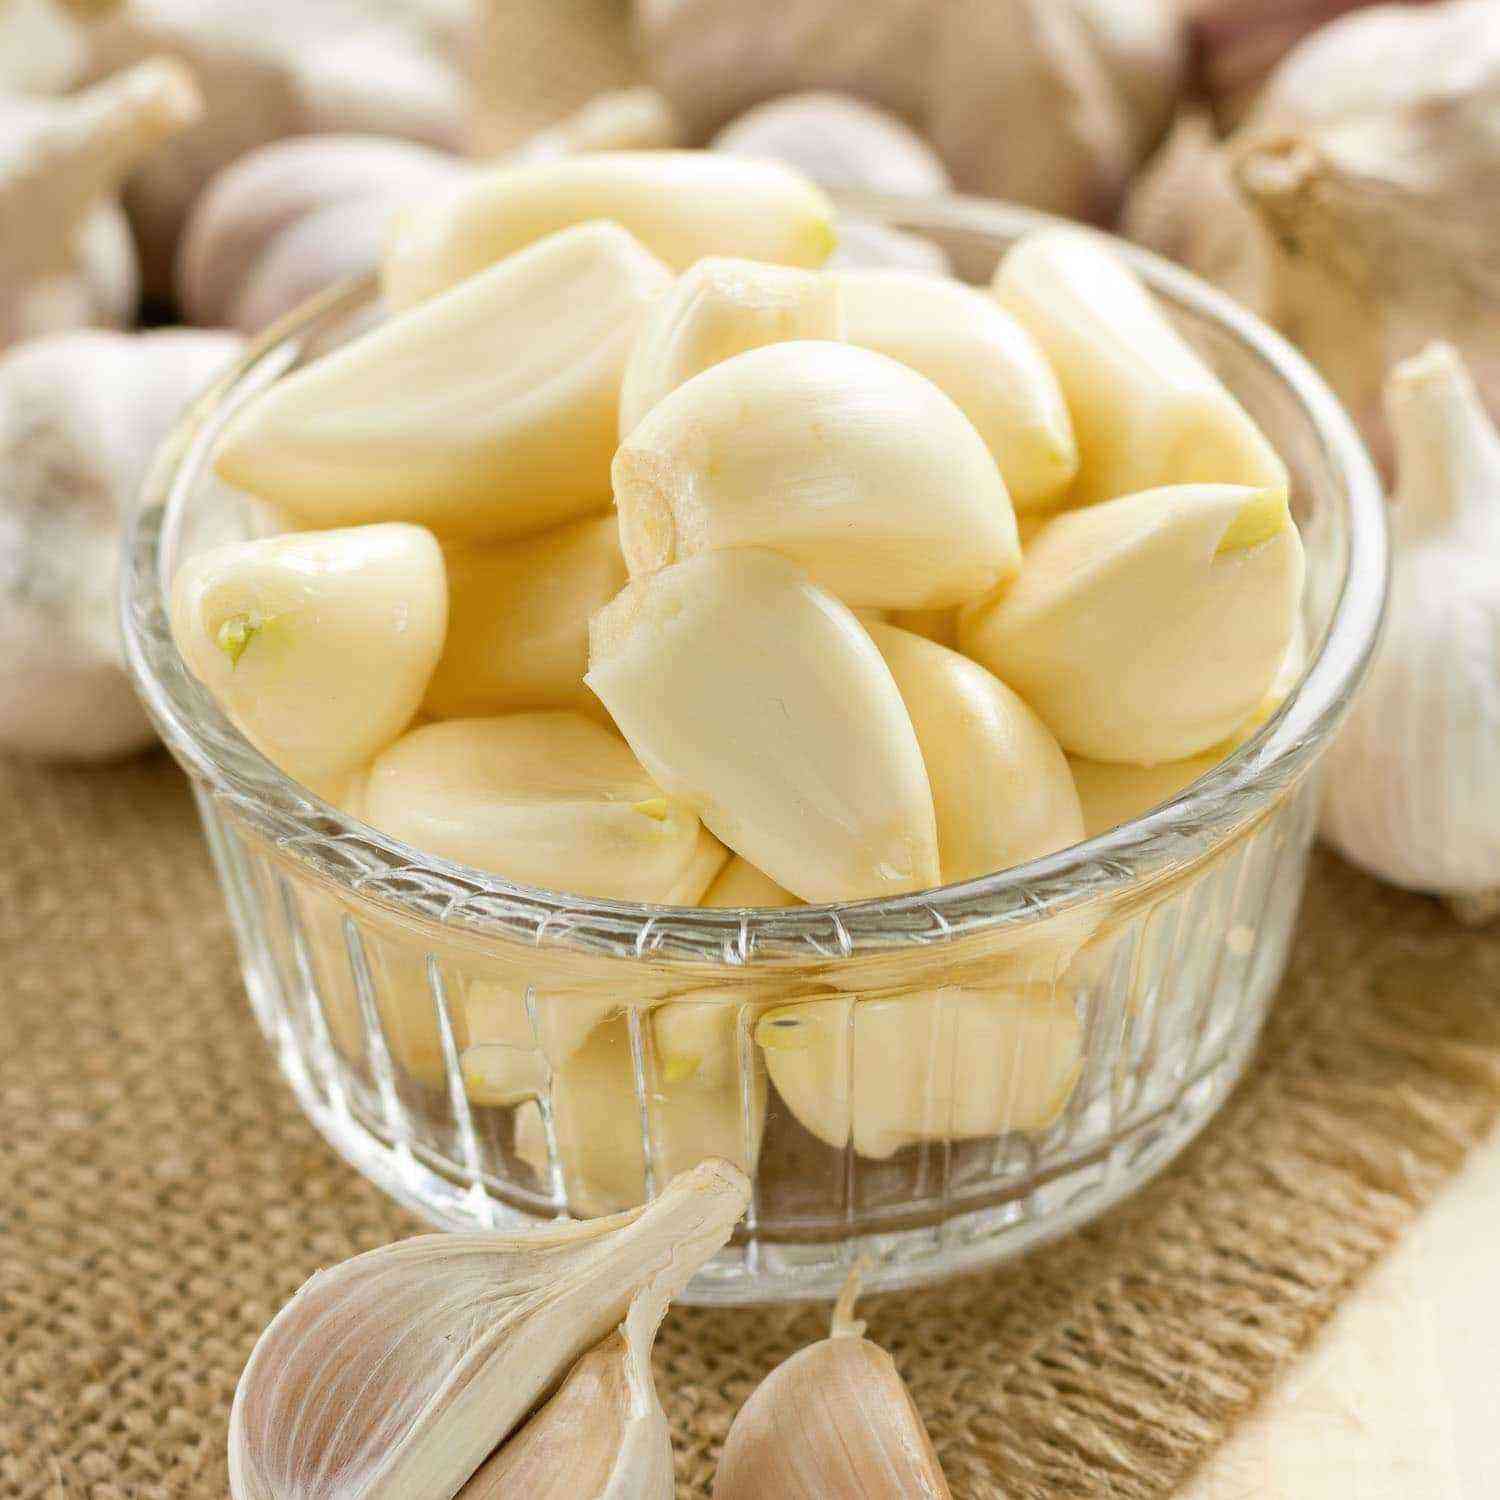 How to store garlic in a glass jar in winter?